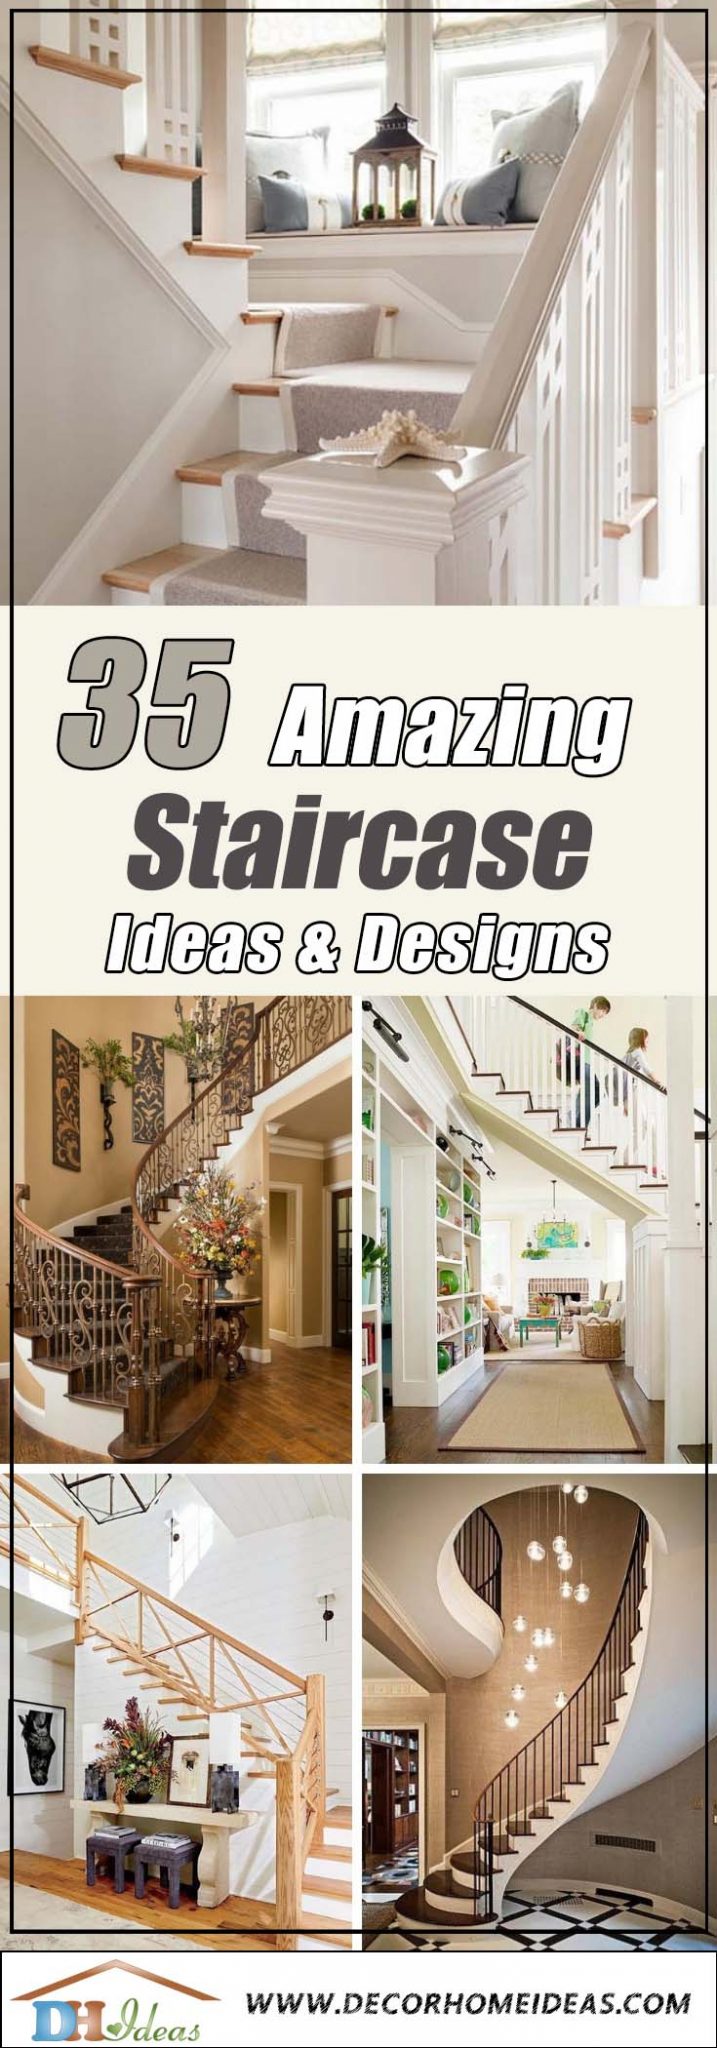 35 Amazing Staircase Ideas That Will Take Your Home to the Next Level